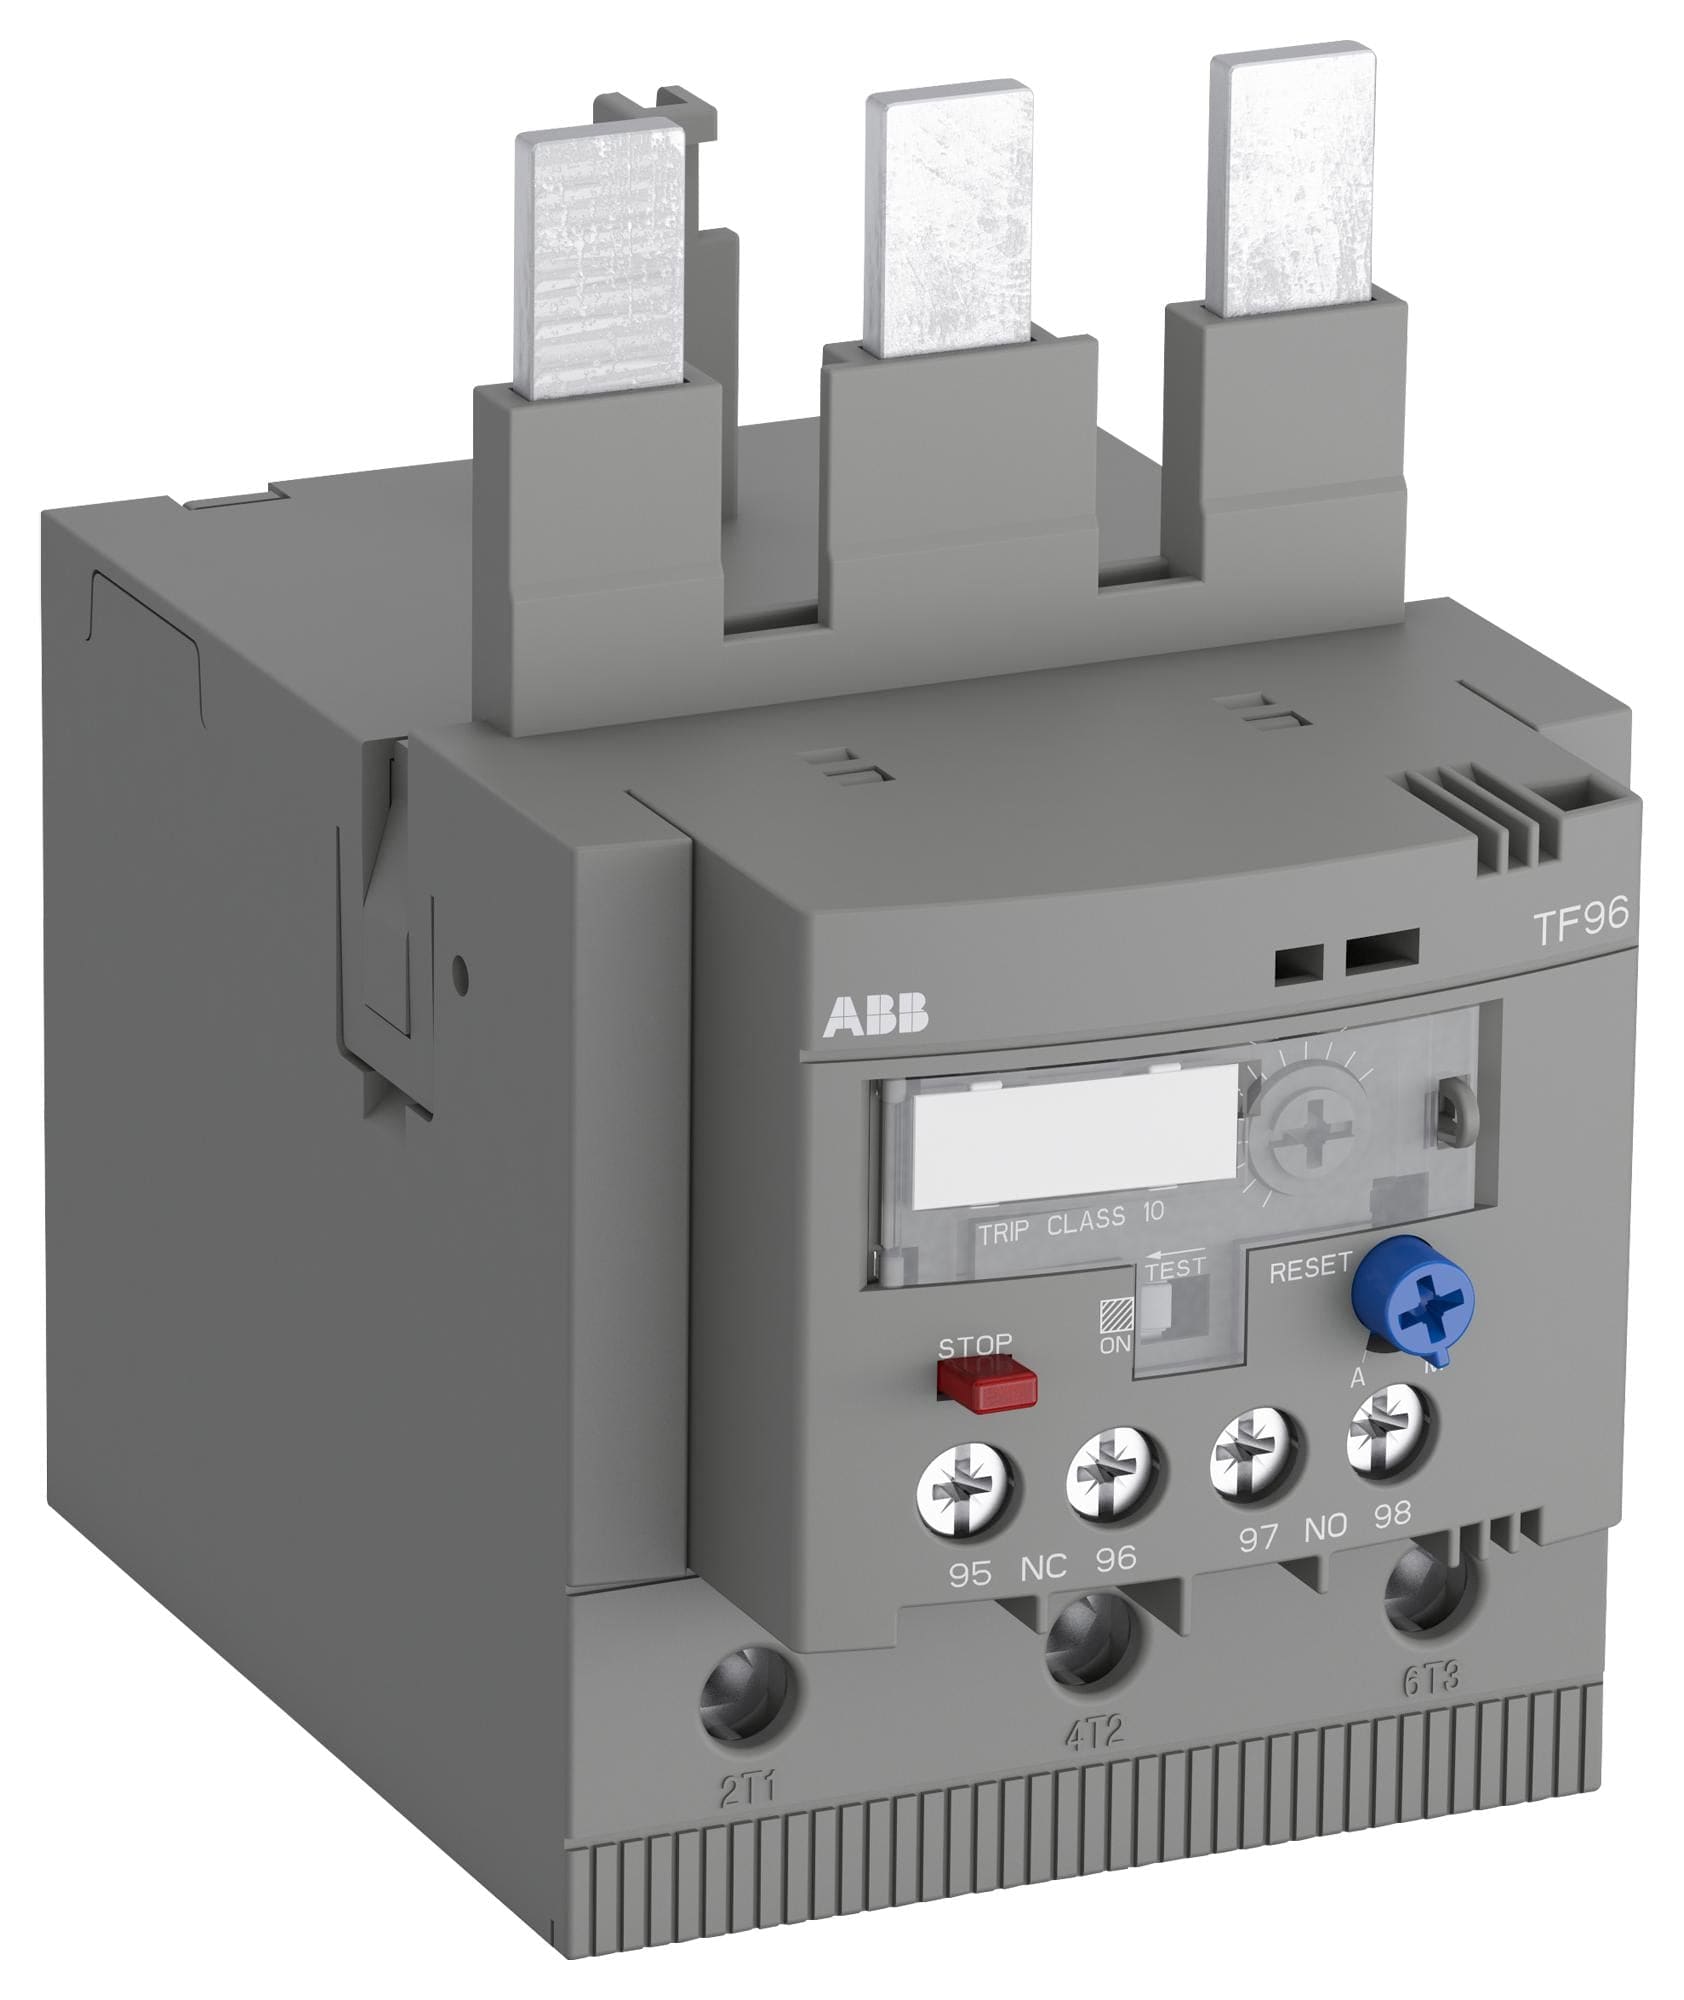 ABB Thermal Overload TF96-96 THERMISTOR OVERLOAD RELAY, 3.7W, 96A ABB 2565030 TF96-96